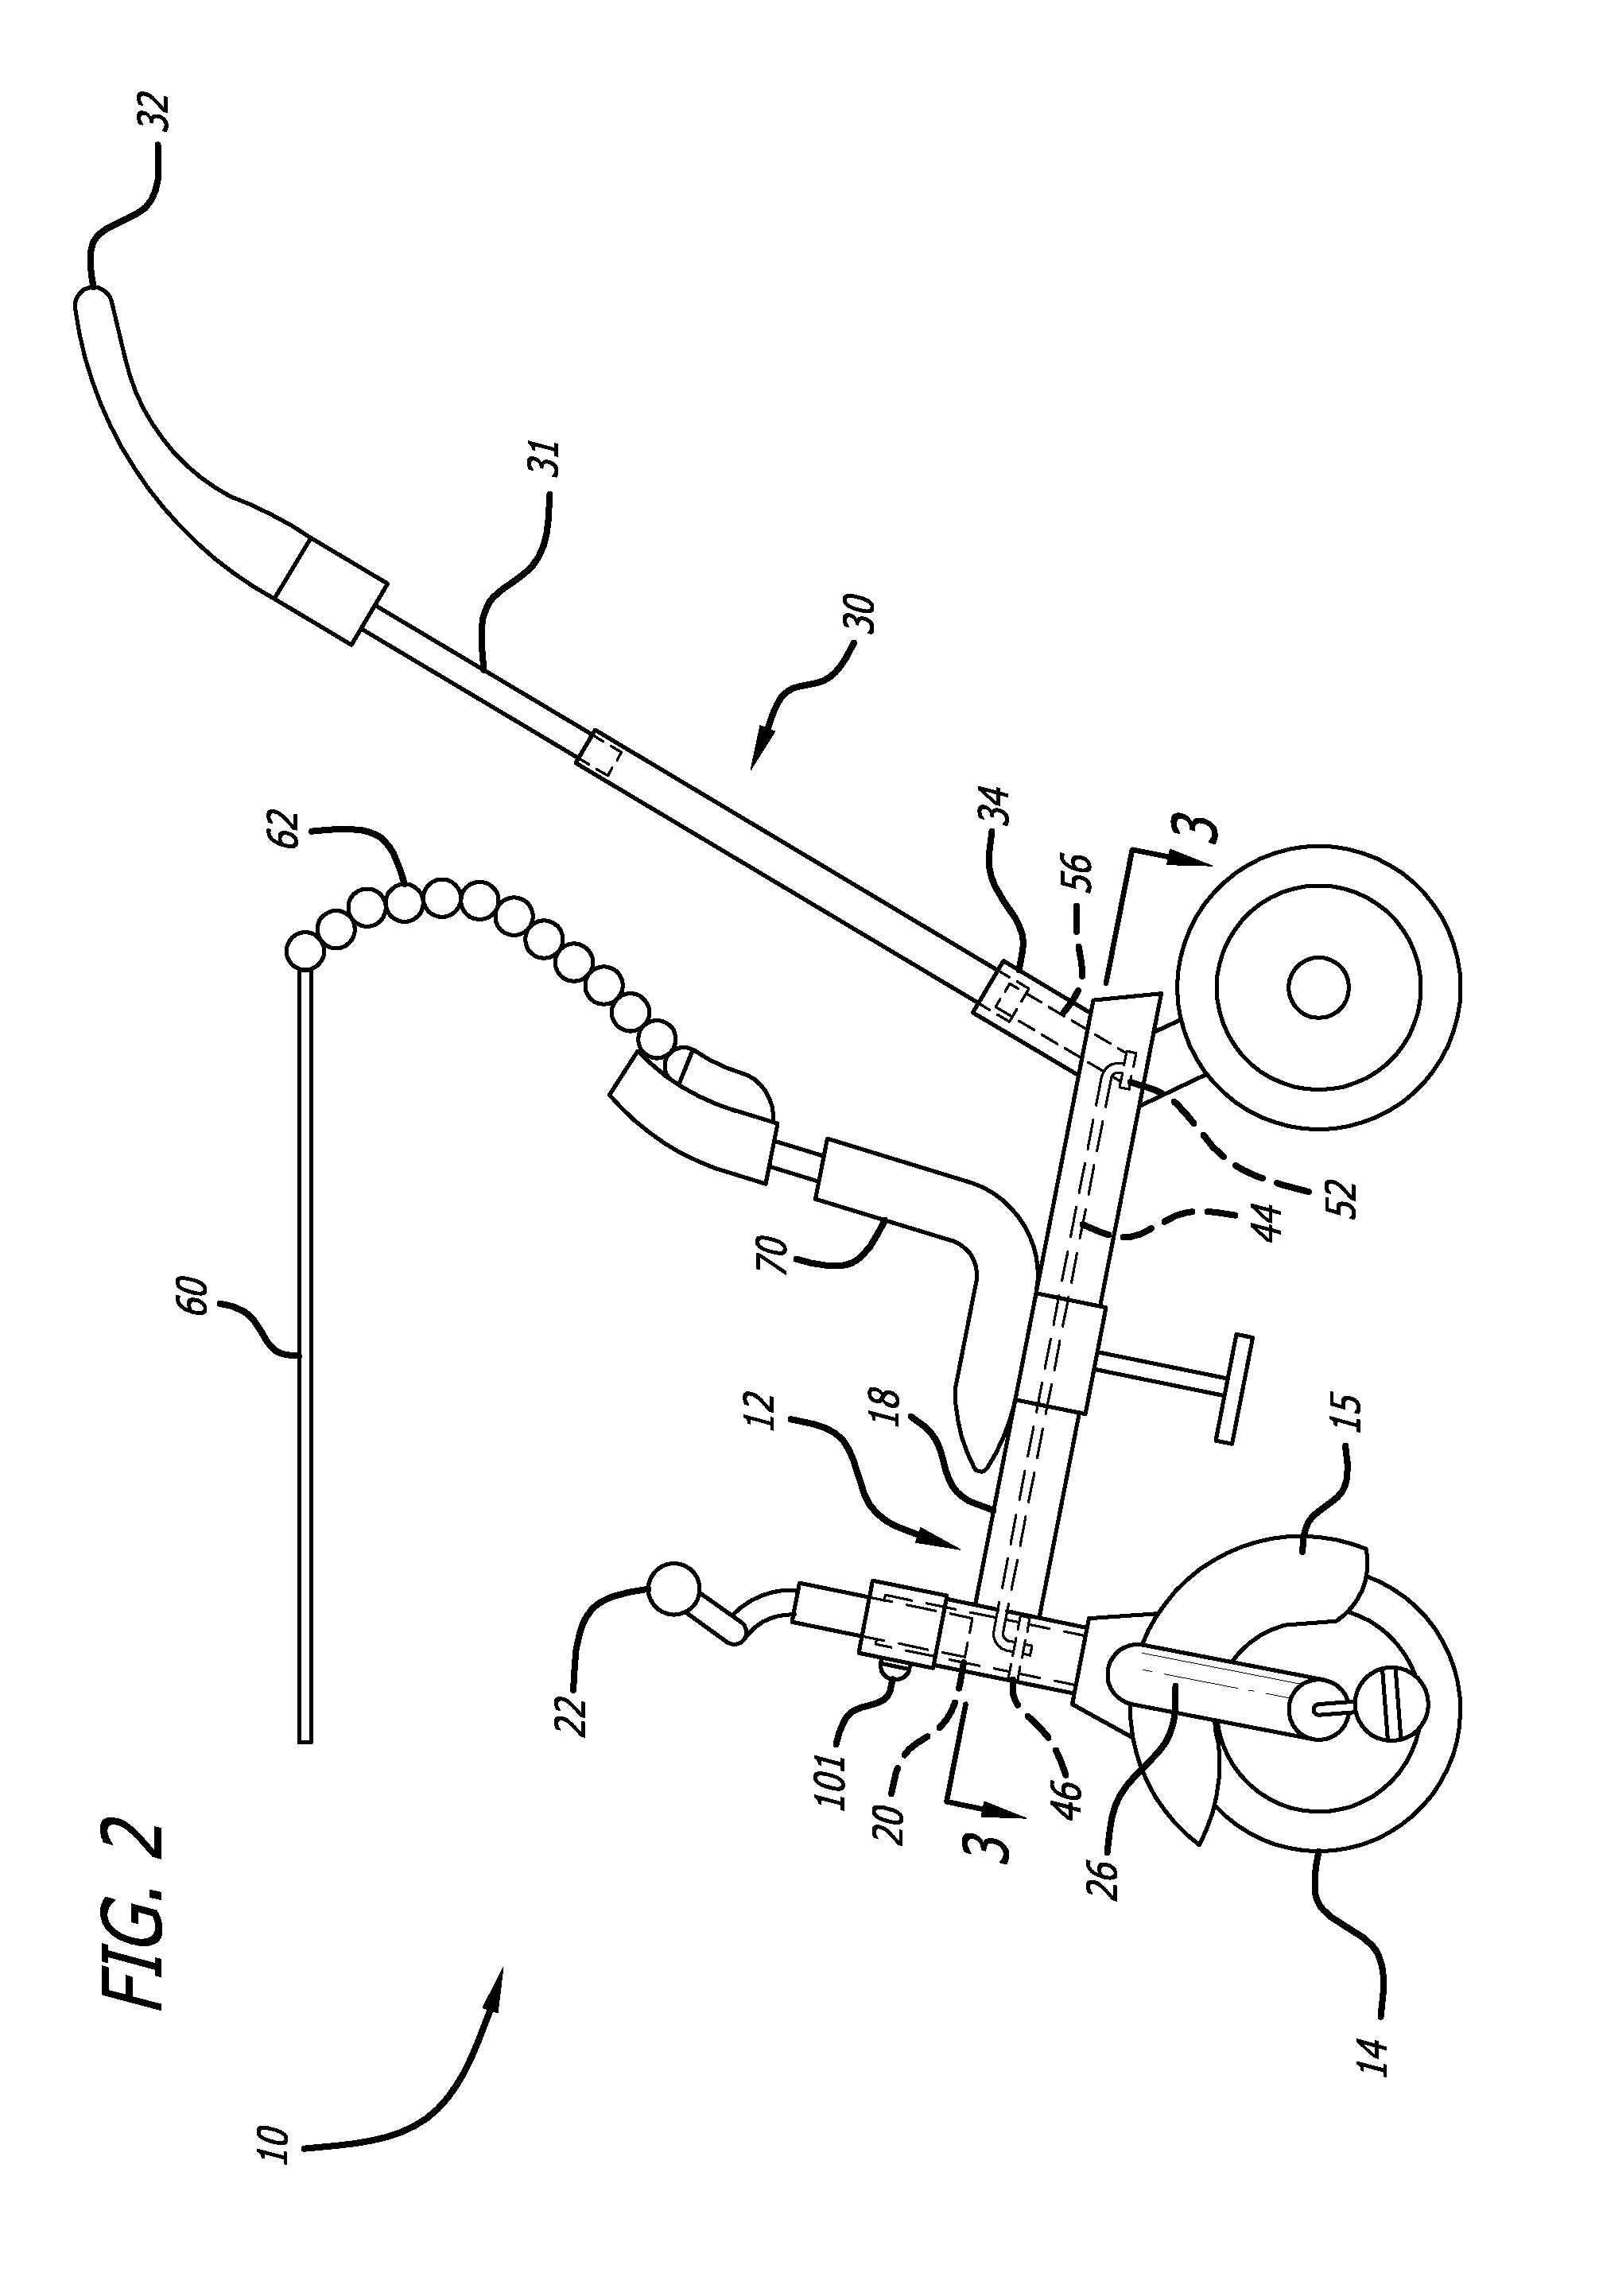 Parent Steerable Tricycle with Internal Steering Limiter